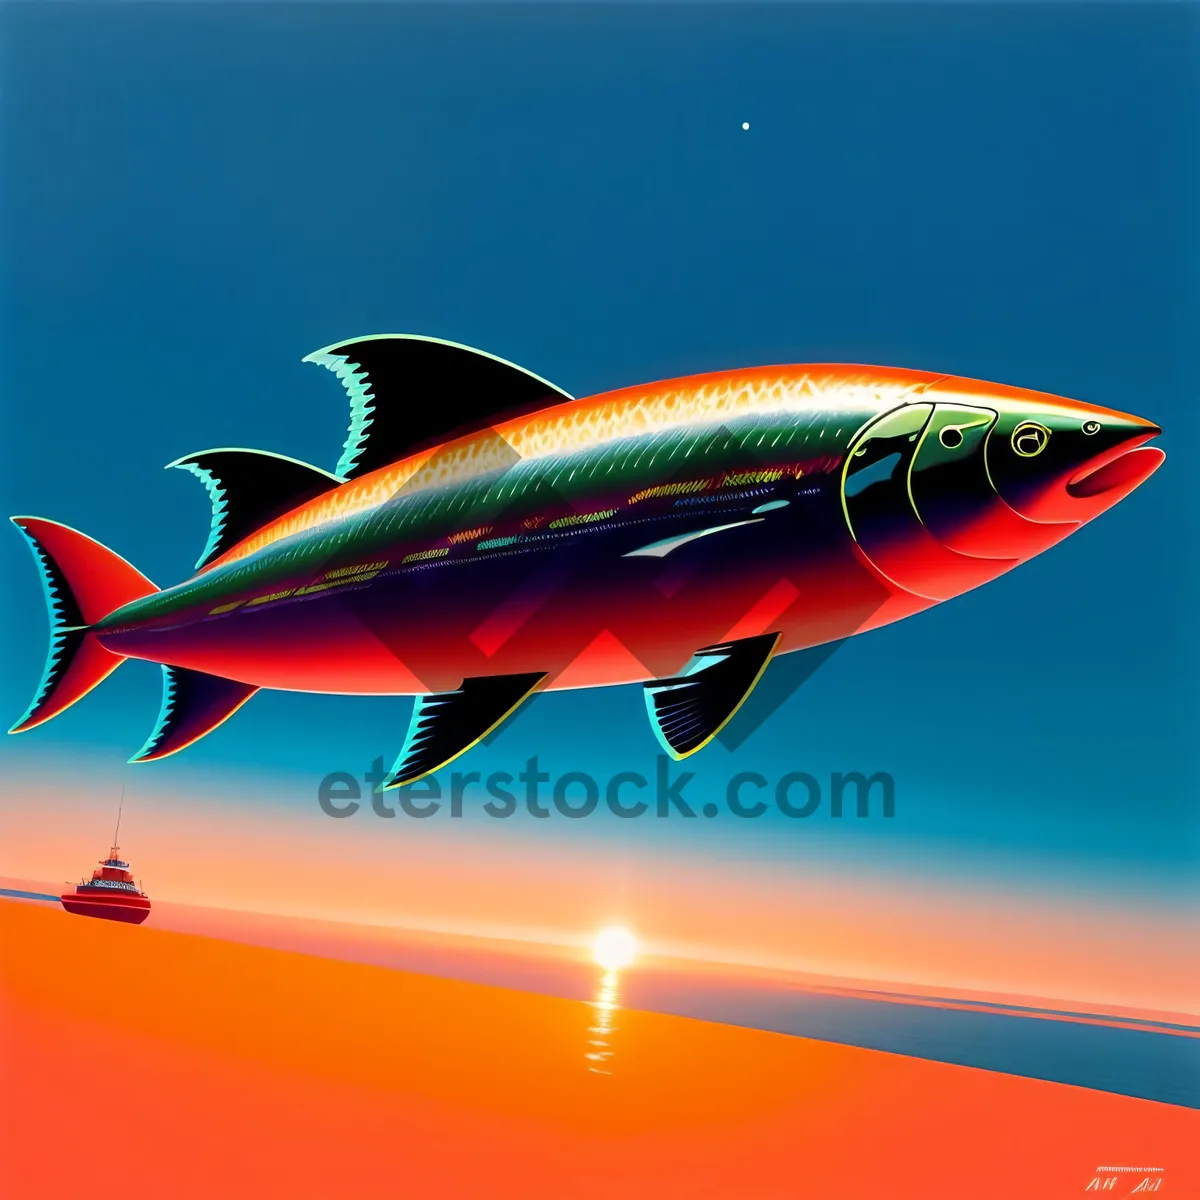 Picture of Skybound Tuna: Flight through Air and Clouds